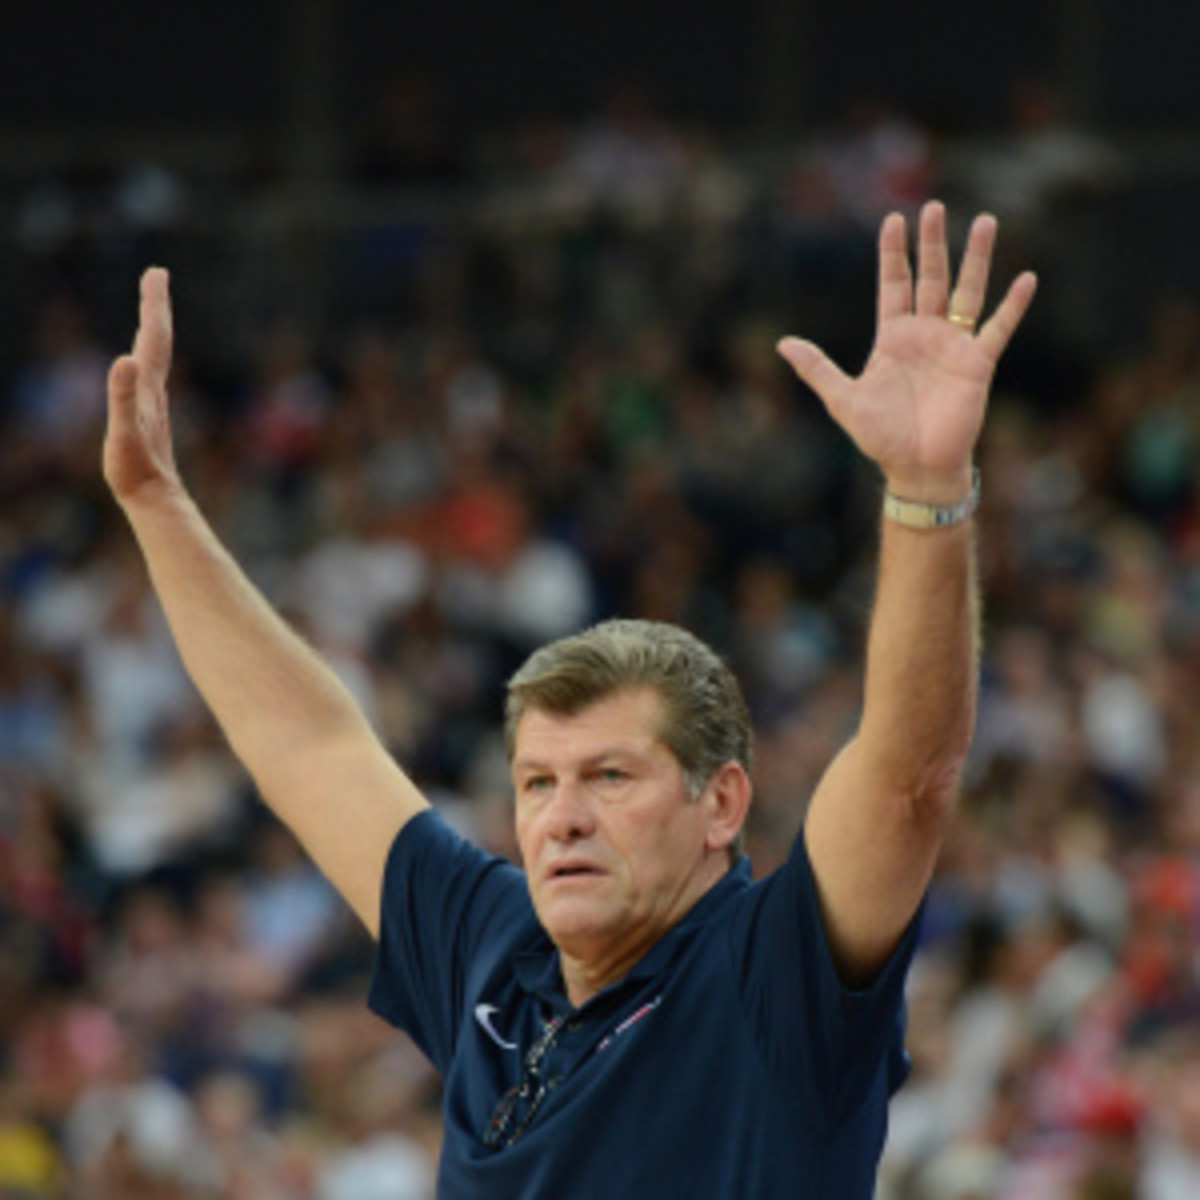 Geno Auriemma signed a $10.8 million contract with UConn, making him the highest paid coach in women's basketball history. (Mark Ralston/Getty Images)